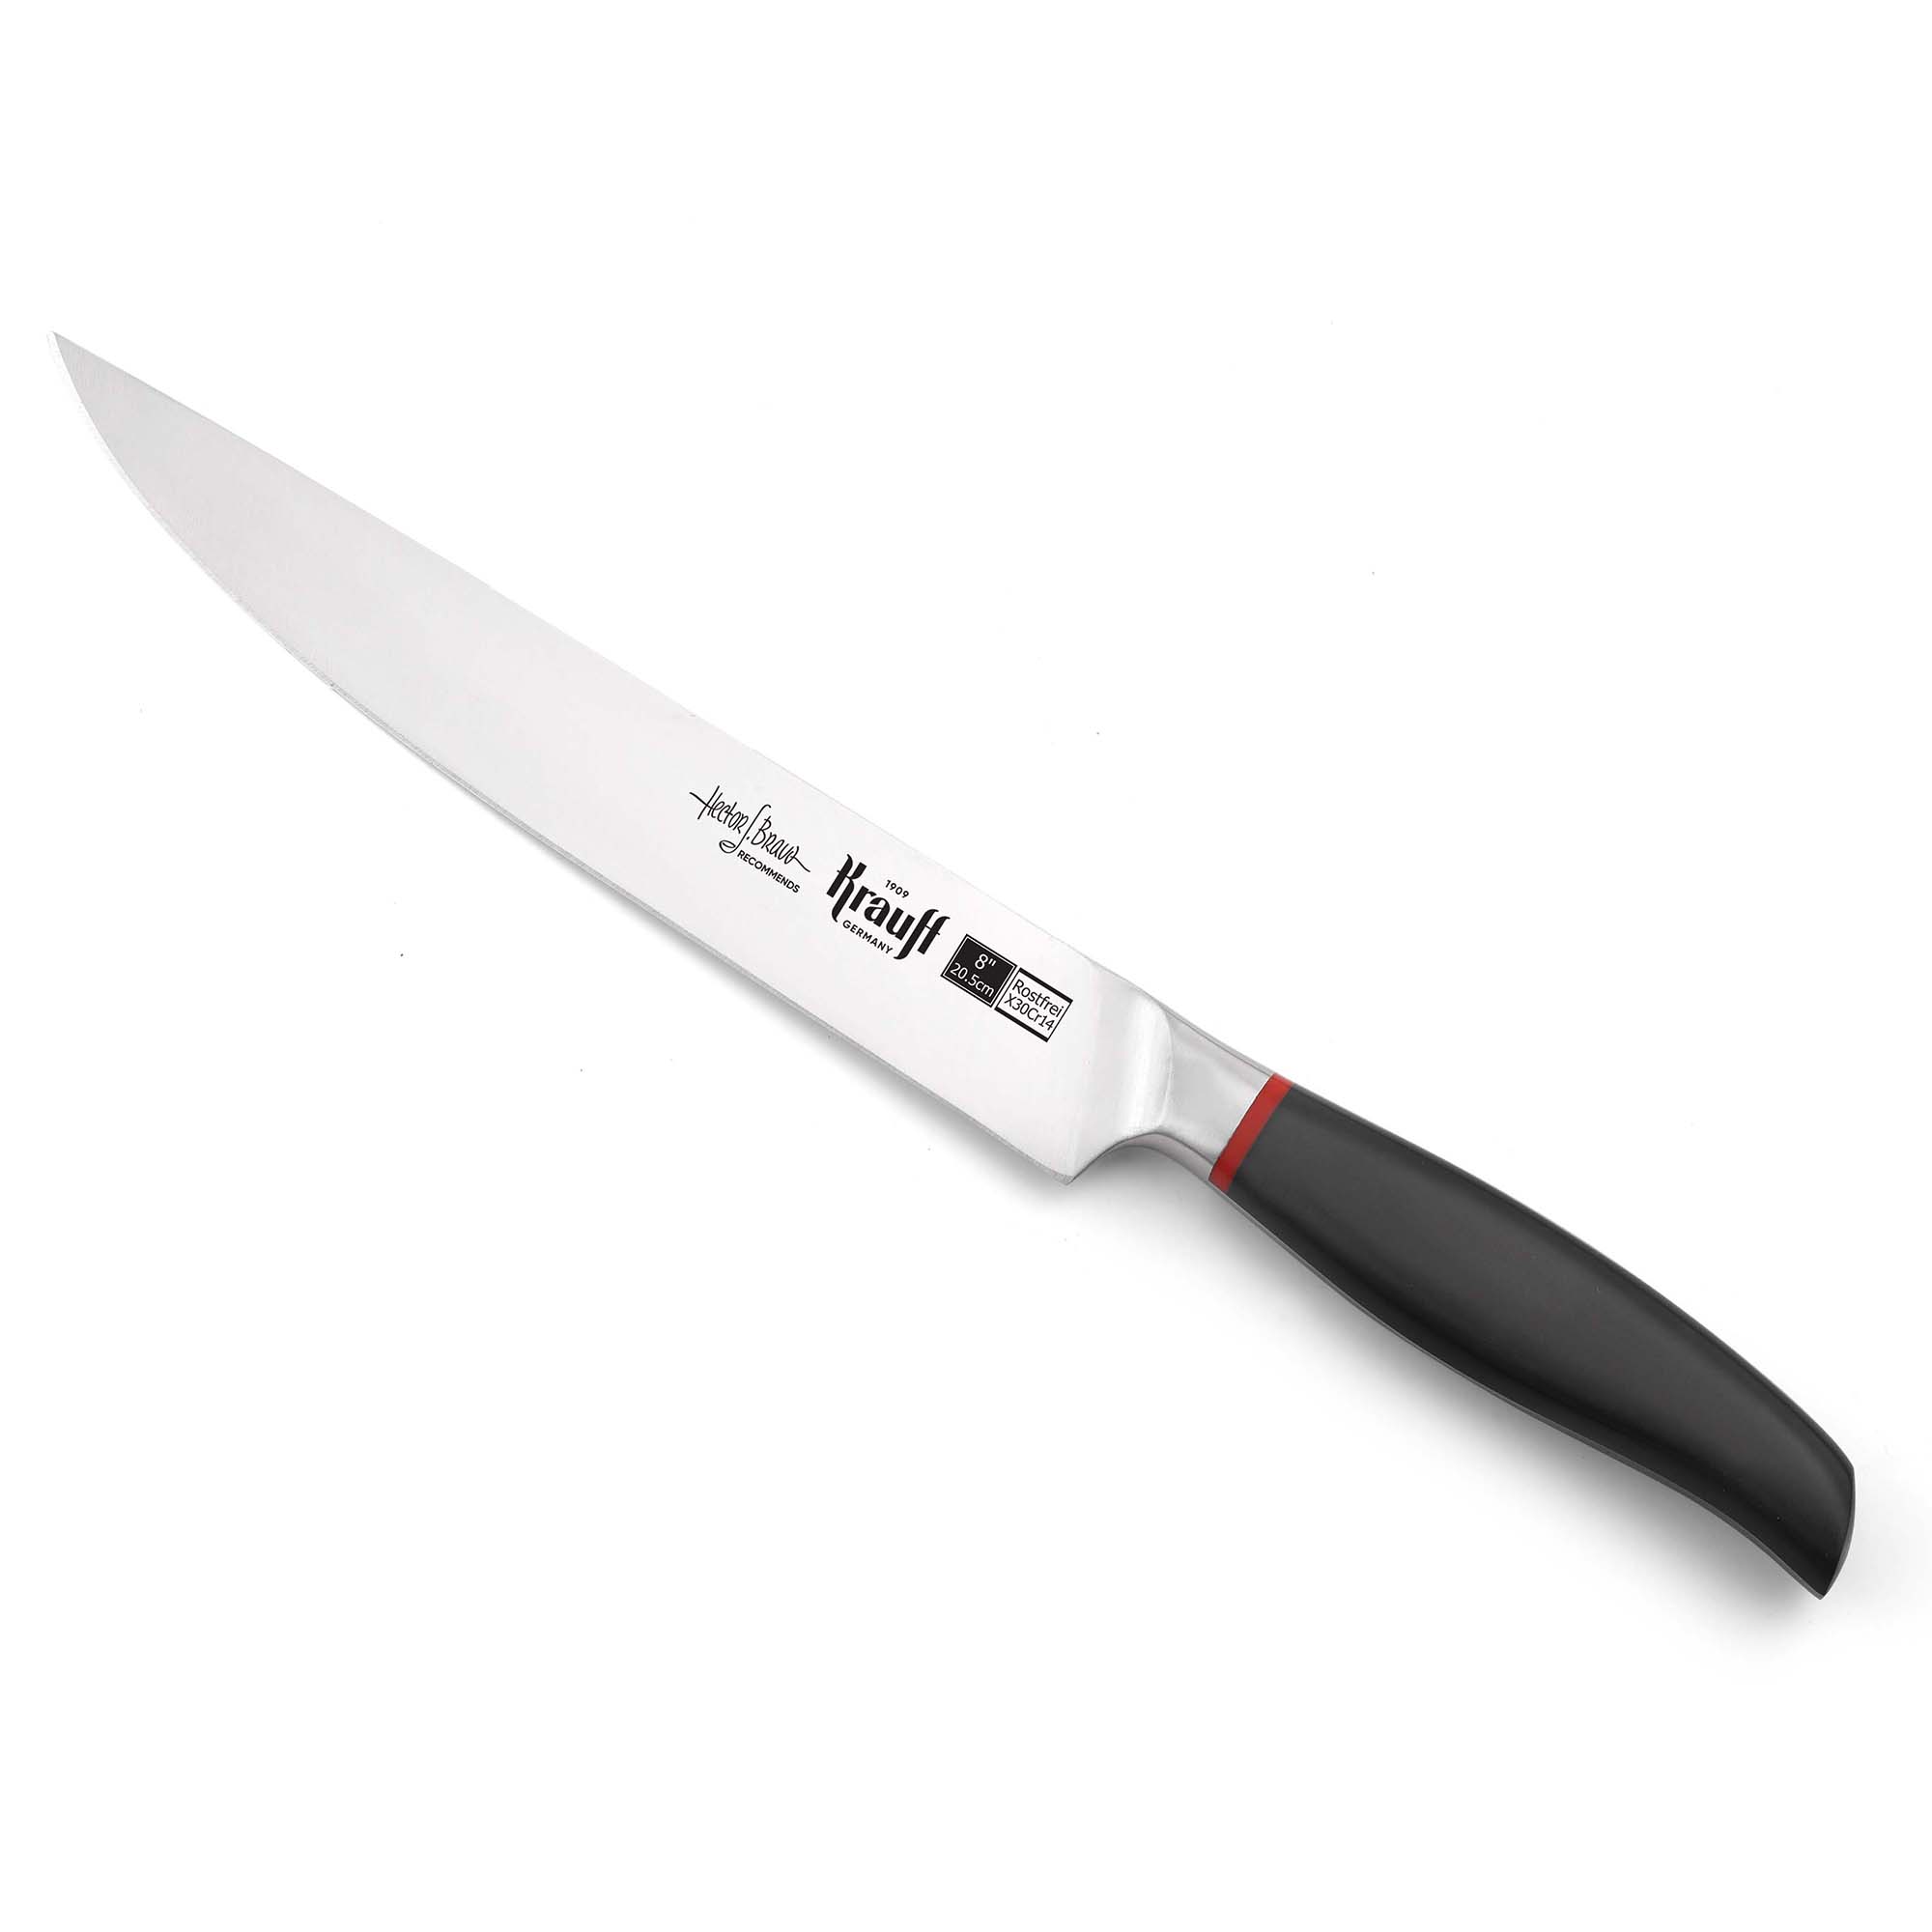 A set of knives with a Smart Shef stand